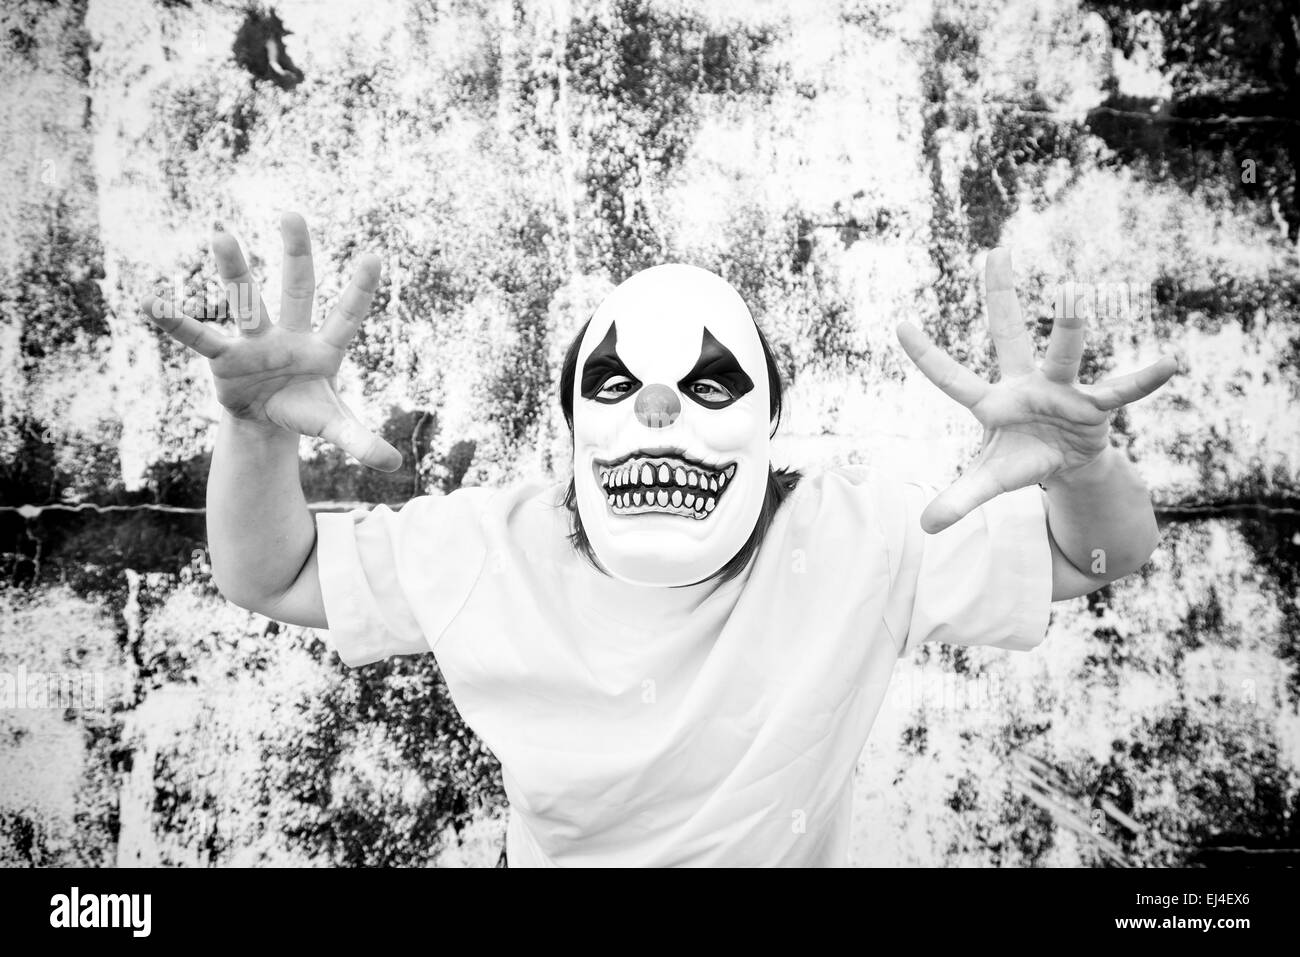 Crazy clown mask halloween costume and fear Stock Photo